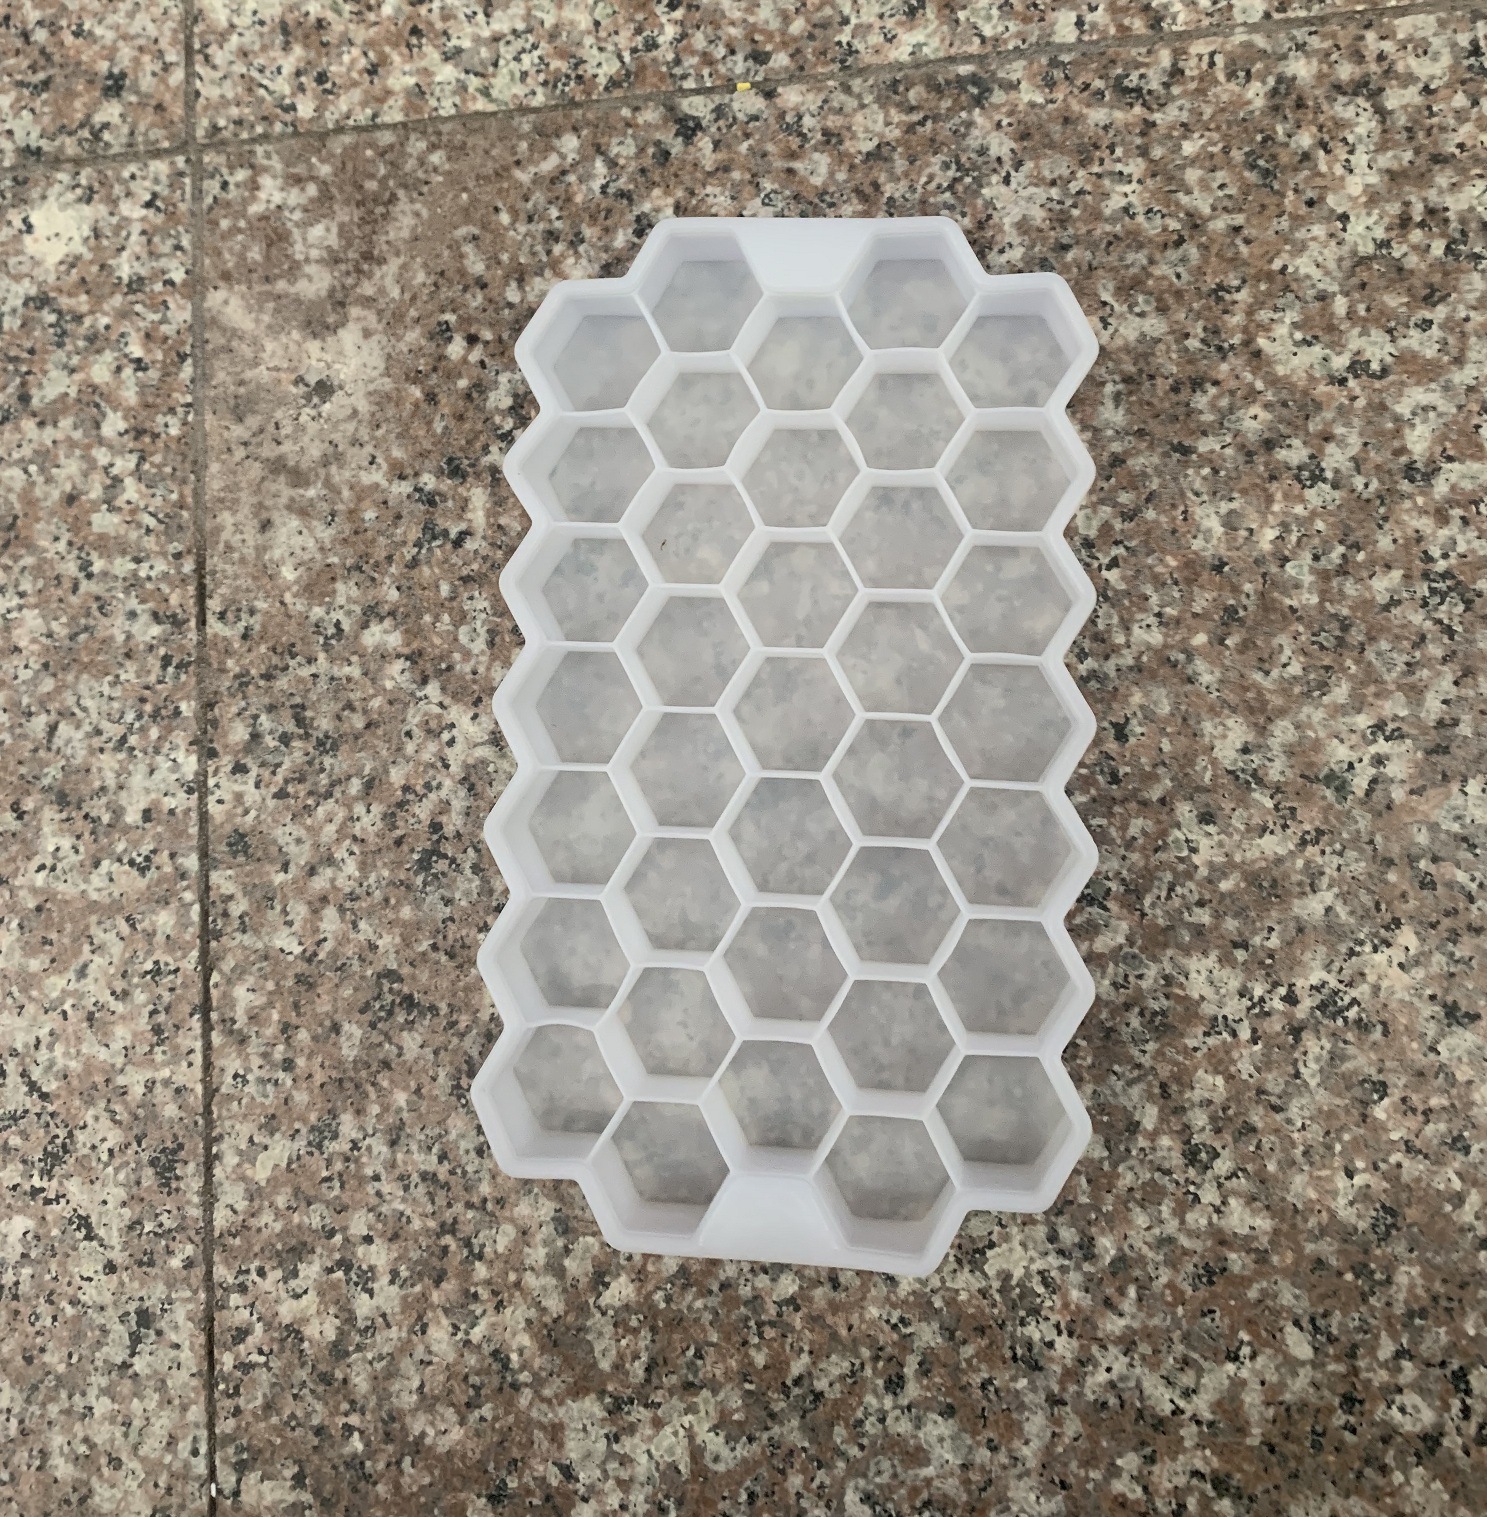 37 Grid Honeycomb Ice Tray Silicone Ice Cube Tray with Lid Ice Tray Diy Ice Mold Ice Cube Mold with Lid